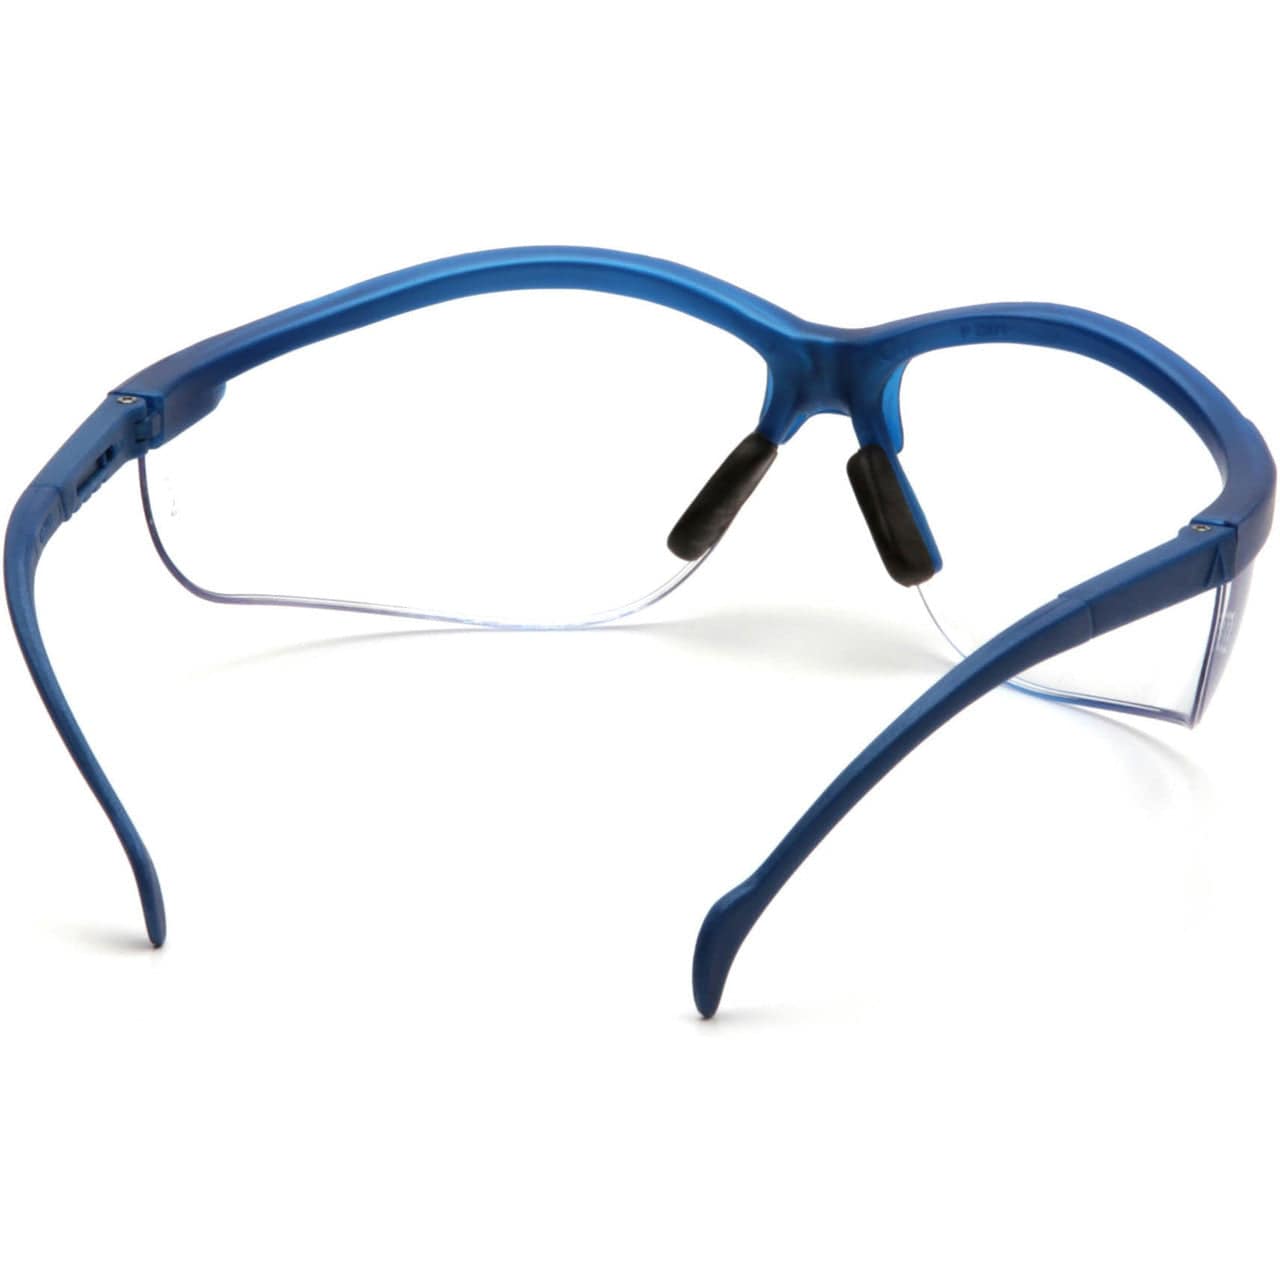 Pyramex Venture 2 Safety Glasses Metallic Blue Frame Clear Lens SMB1810S Inside View